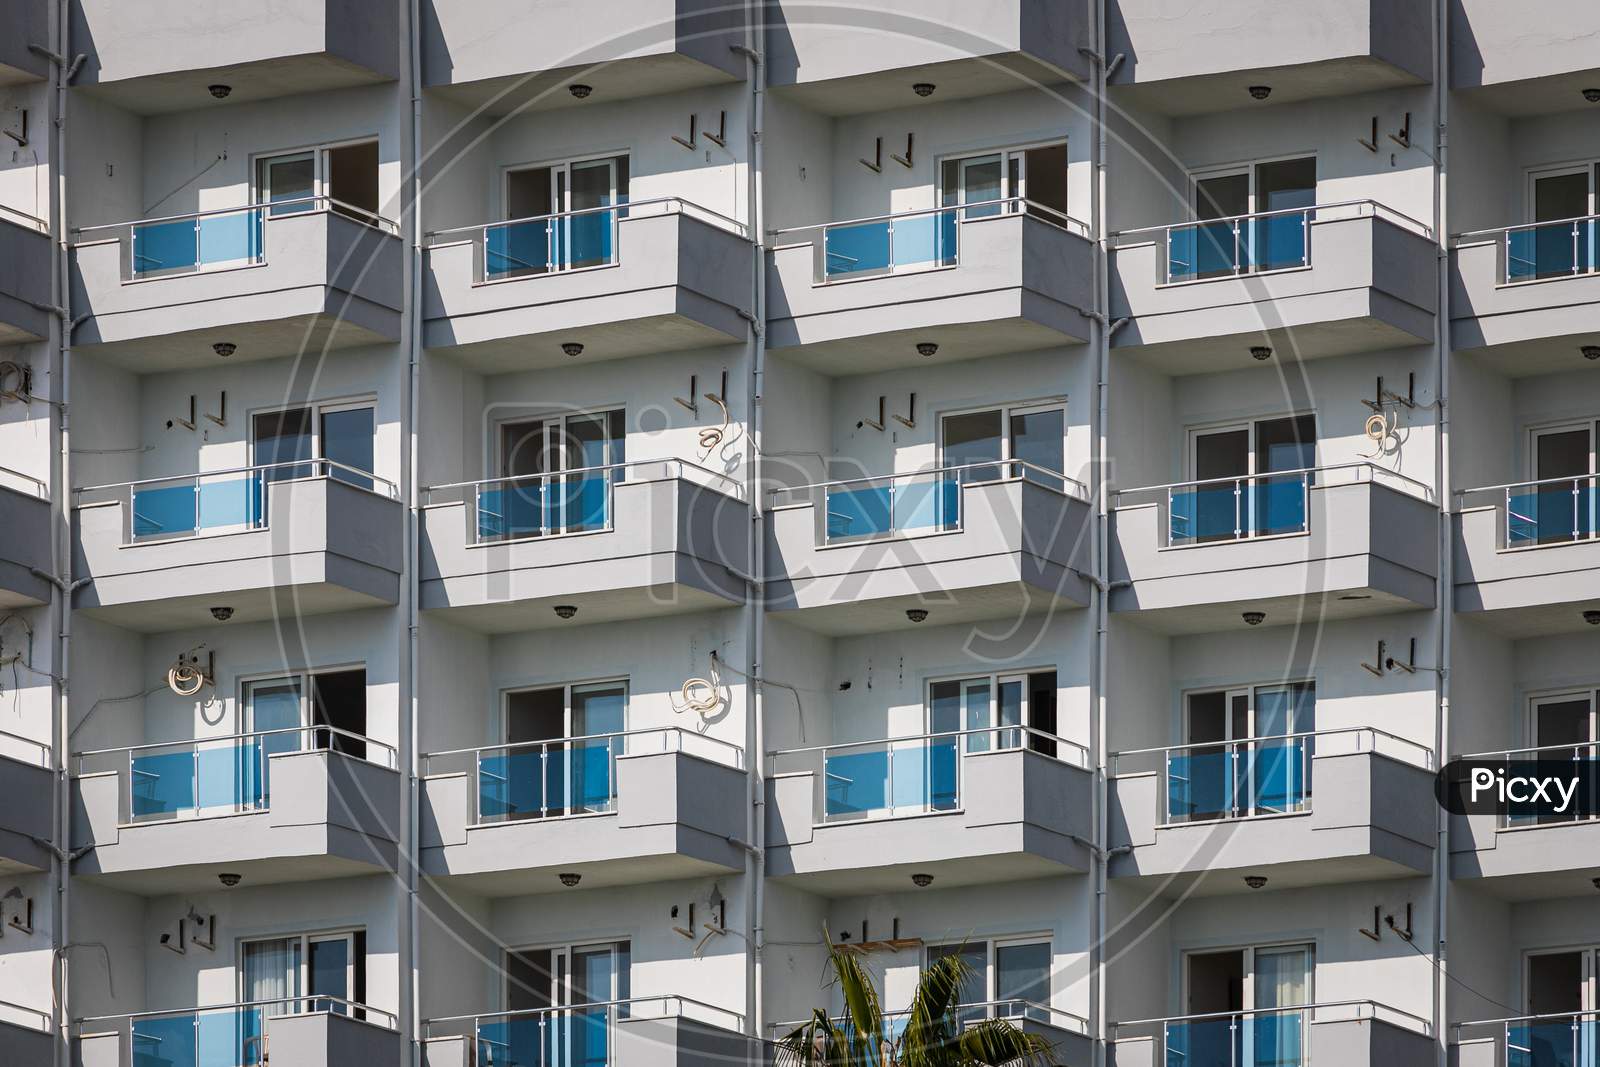 A White Residential Building With Flat, Identical Balconies With Ripped Air Conditioners And Broken Glass. Balcony Pattern